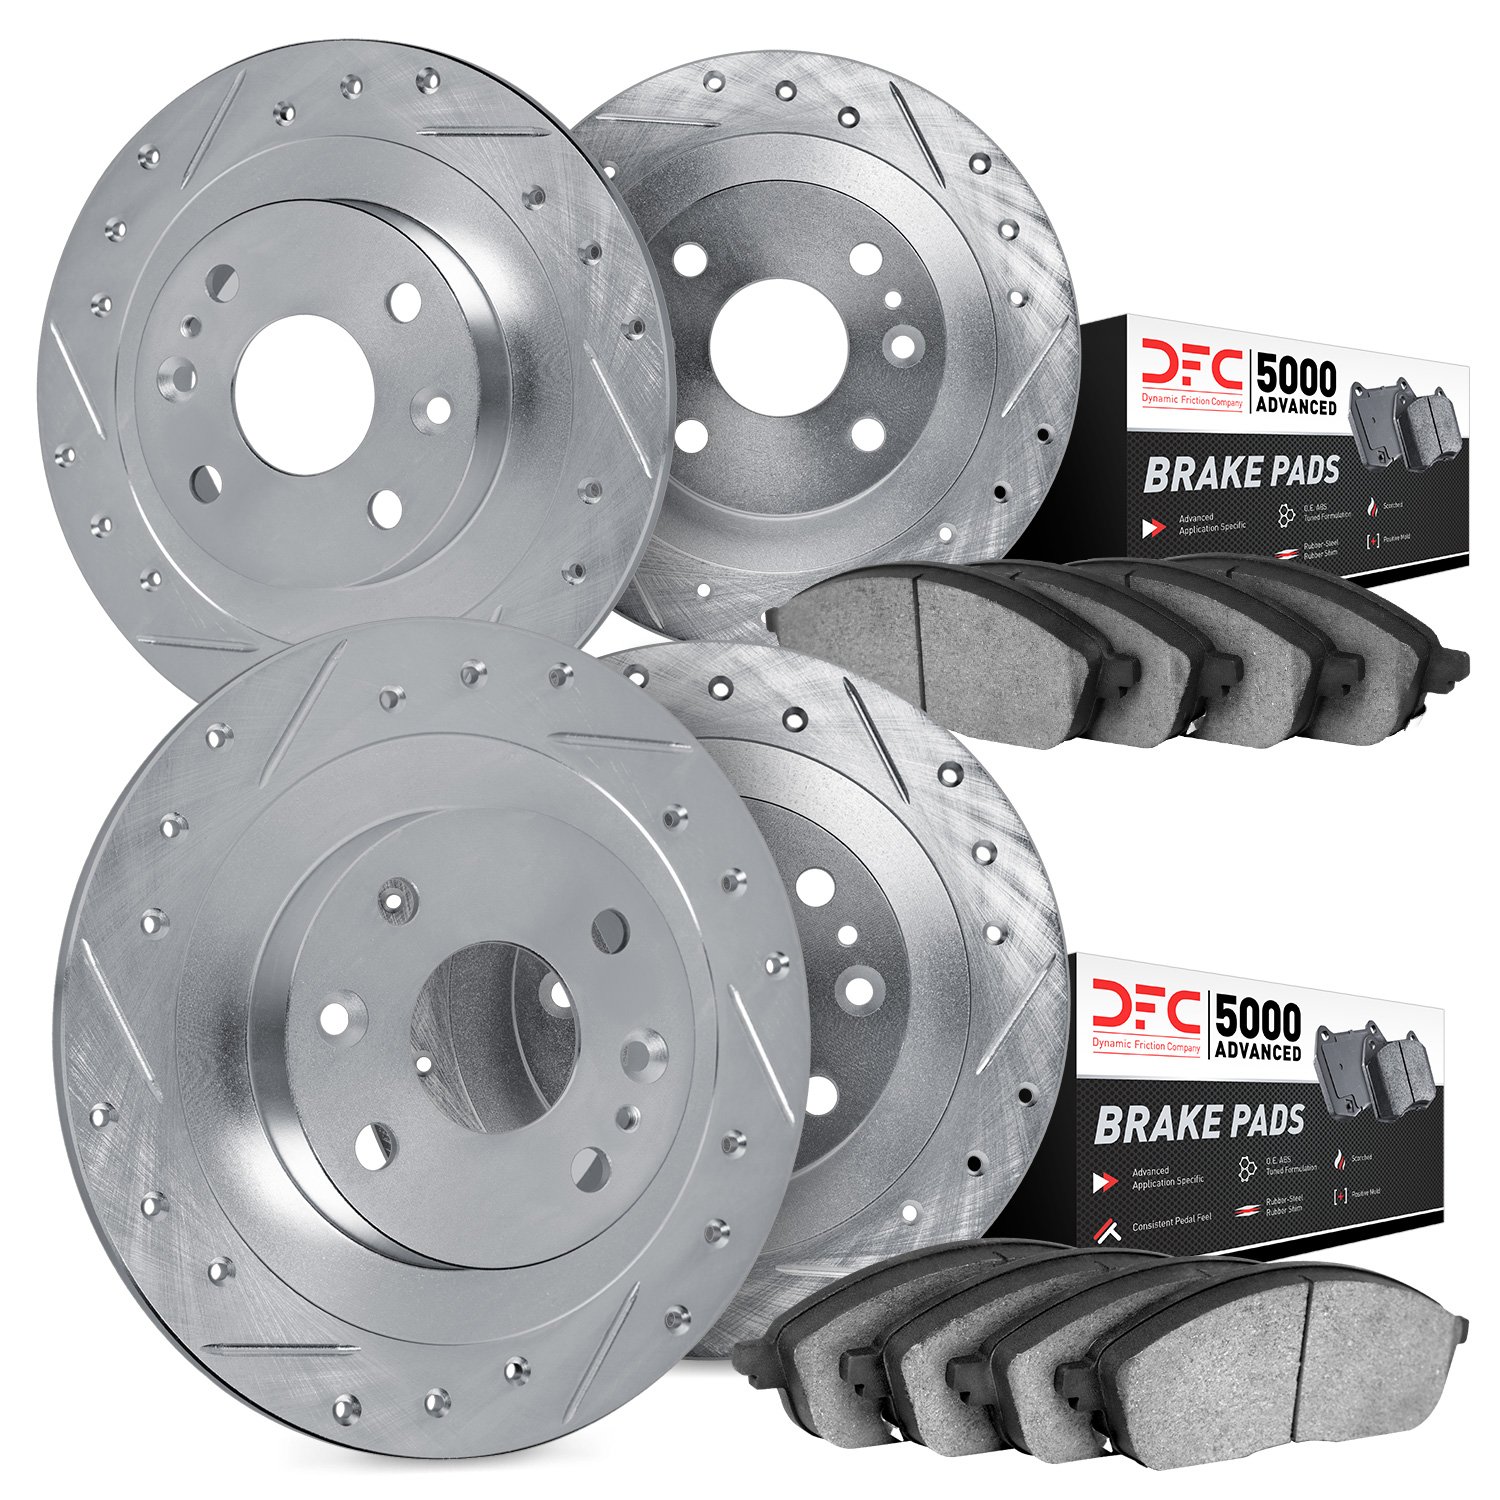 7504-76108 Drilled/Slotted Brake Rotors w/5000 Advanced Brake Pads Kit [Silver], 1979-1981 Lexus/Toyota/Scion, Position: Front a